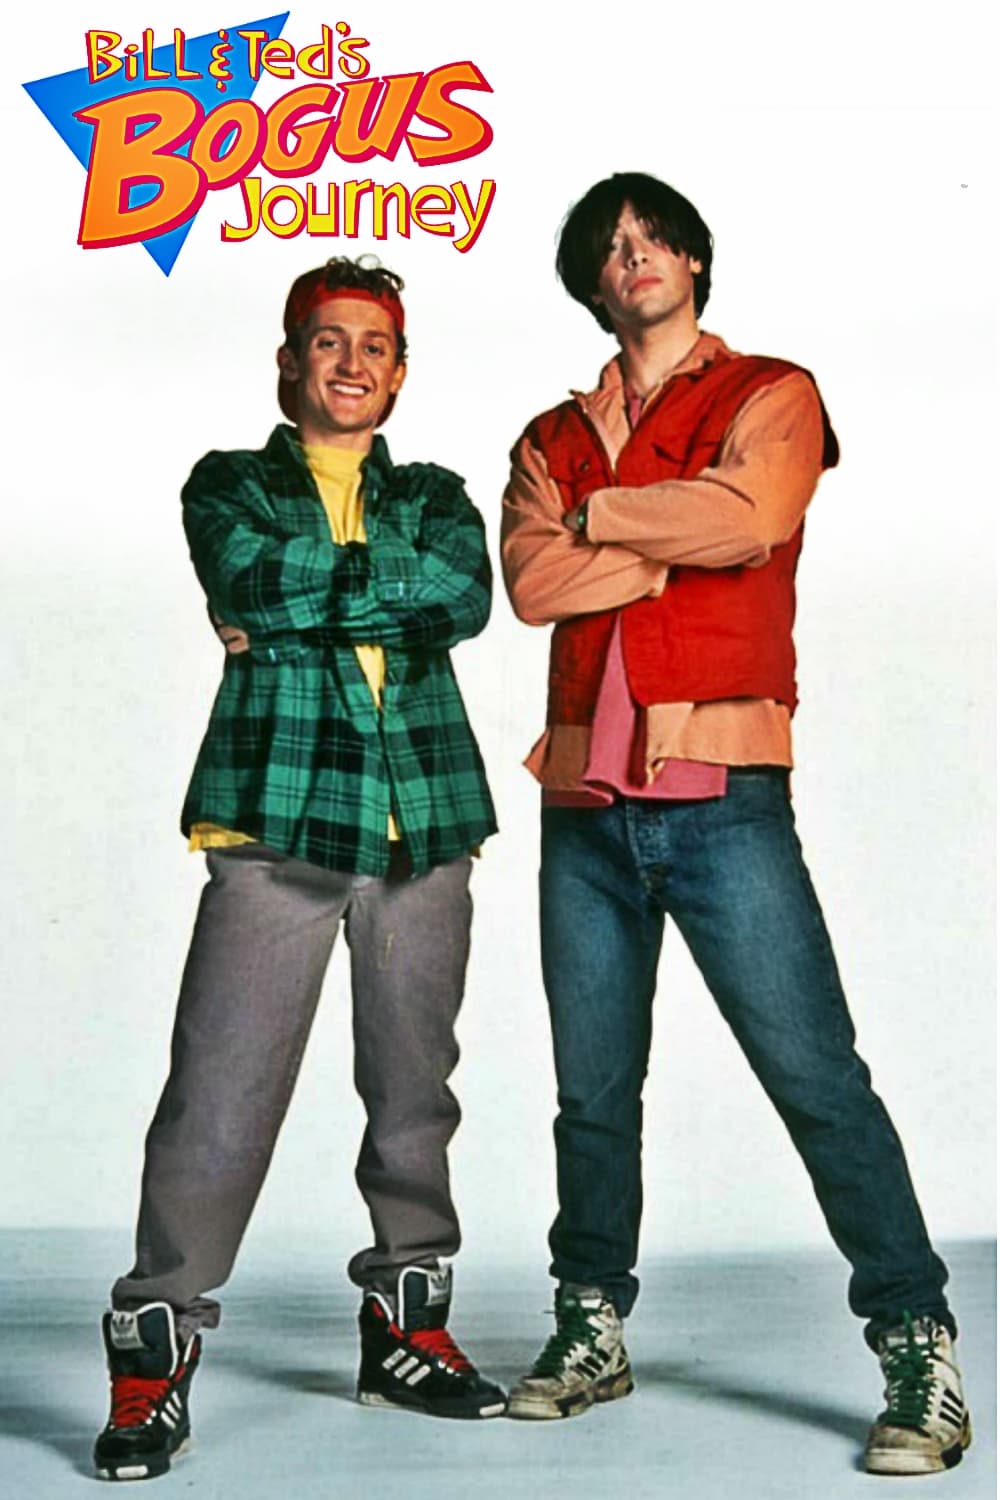 bill and ted's bogus journey synopsis